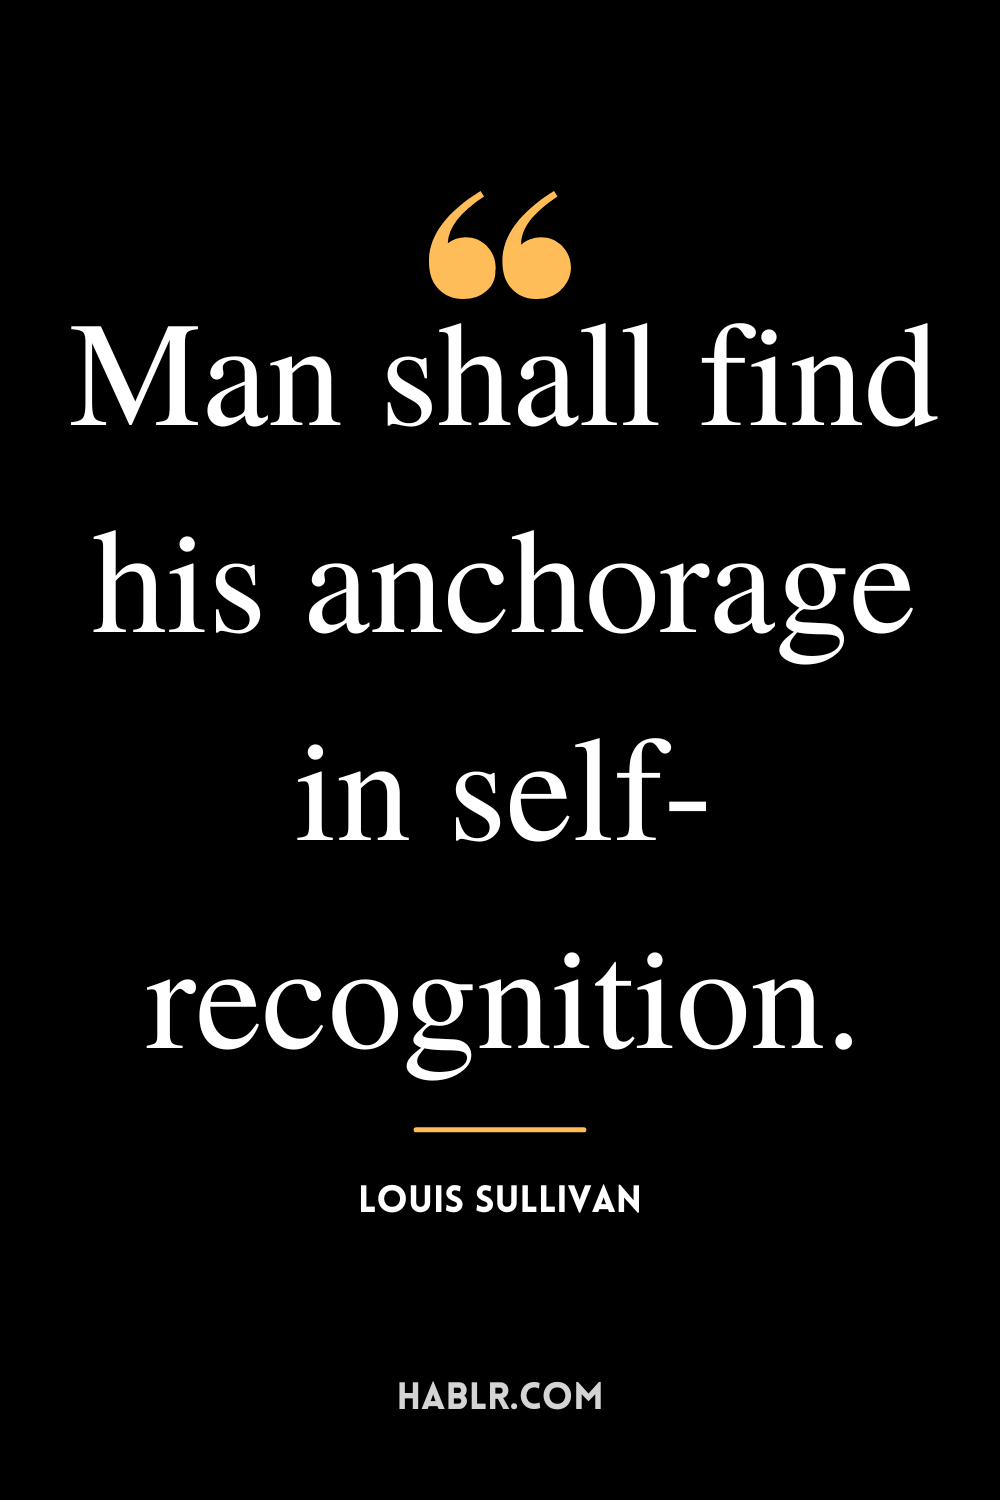 “Man shall find his anchorage in self-recognition.” -Louis Sullivan